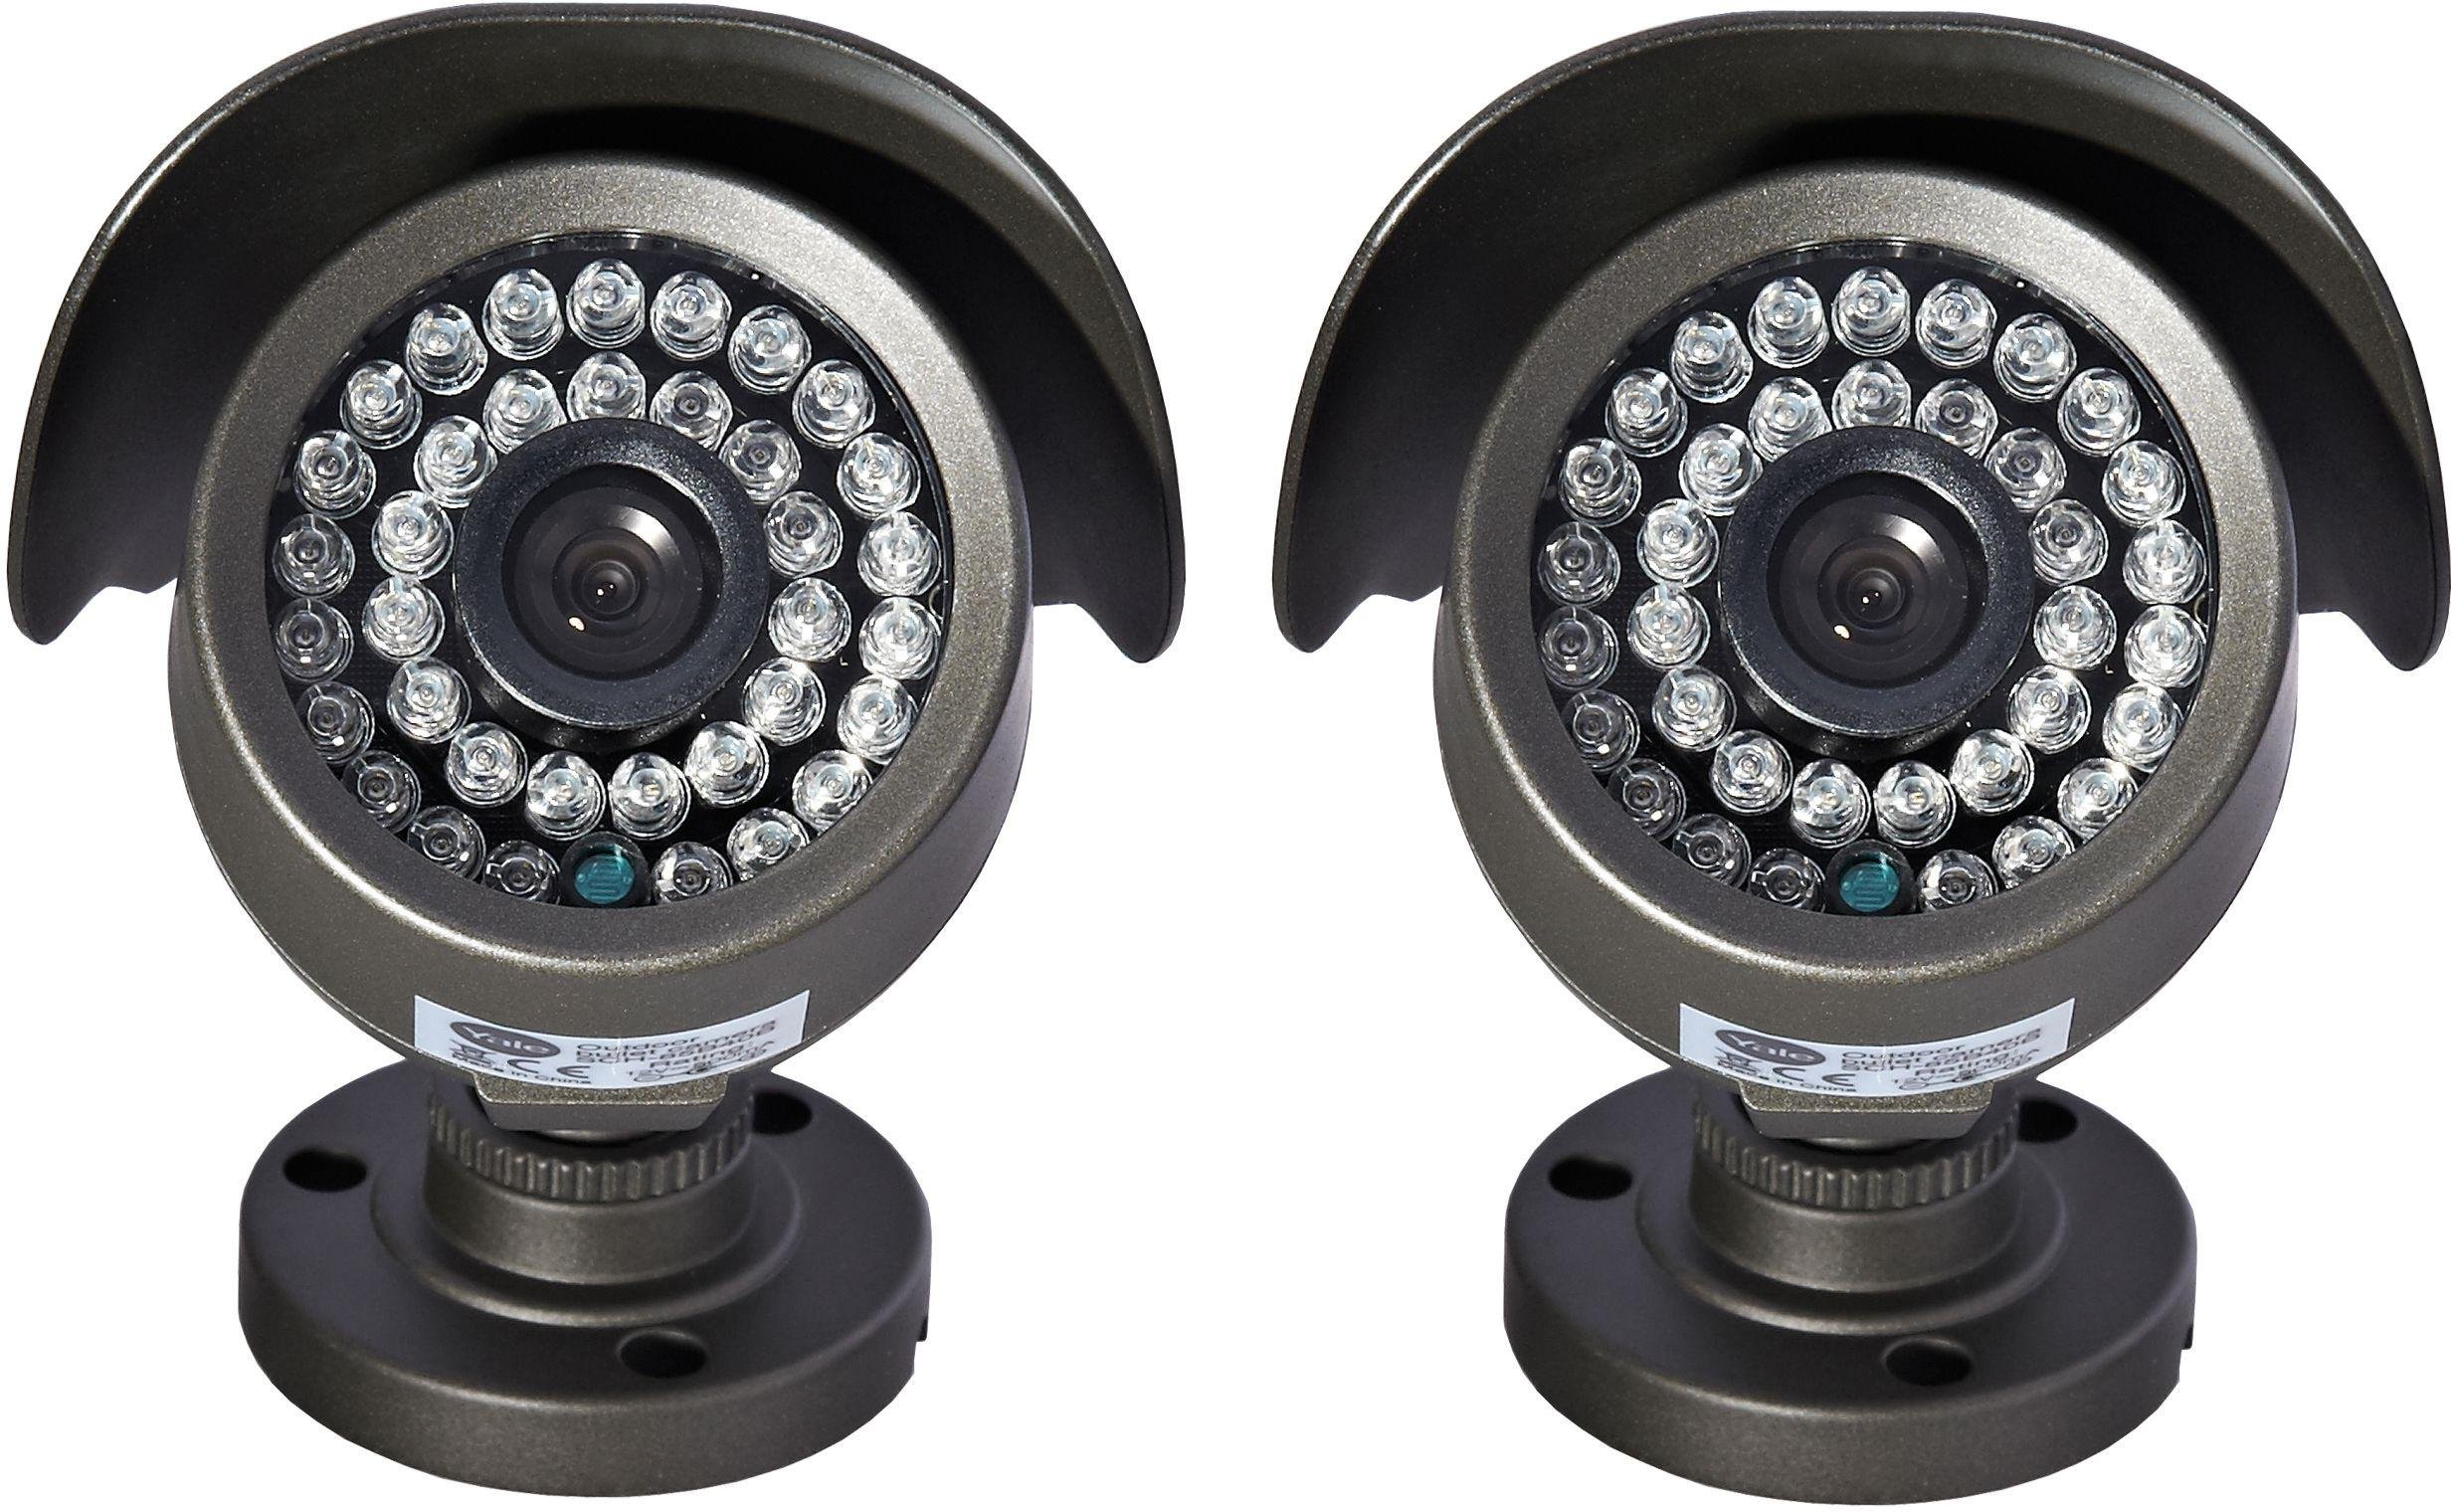 Yale Easy Fit Outdoor Bullet Camera - Twin Pack